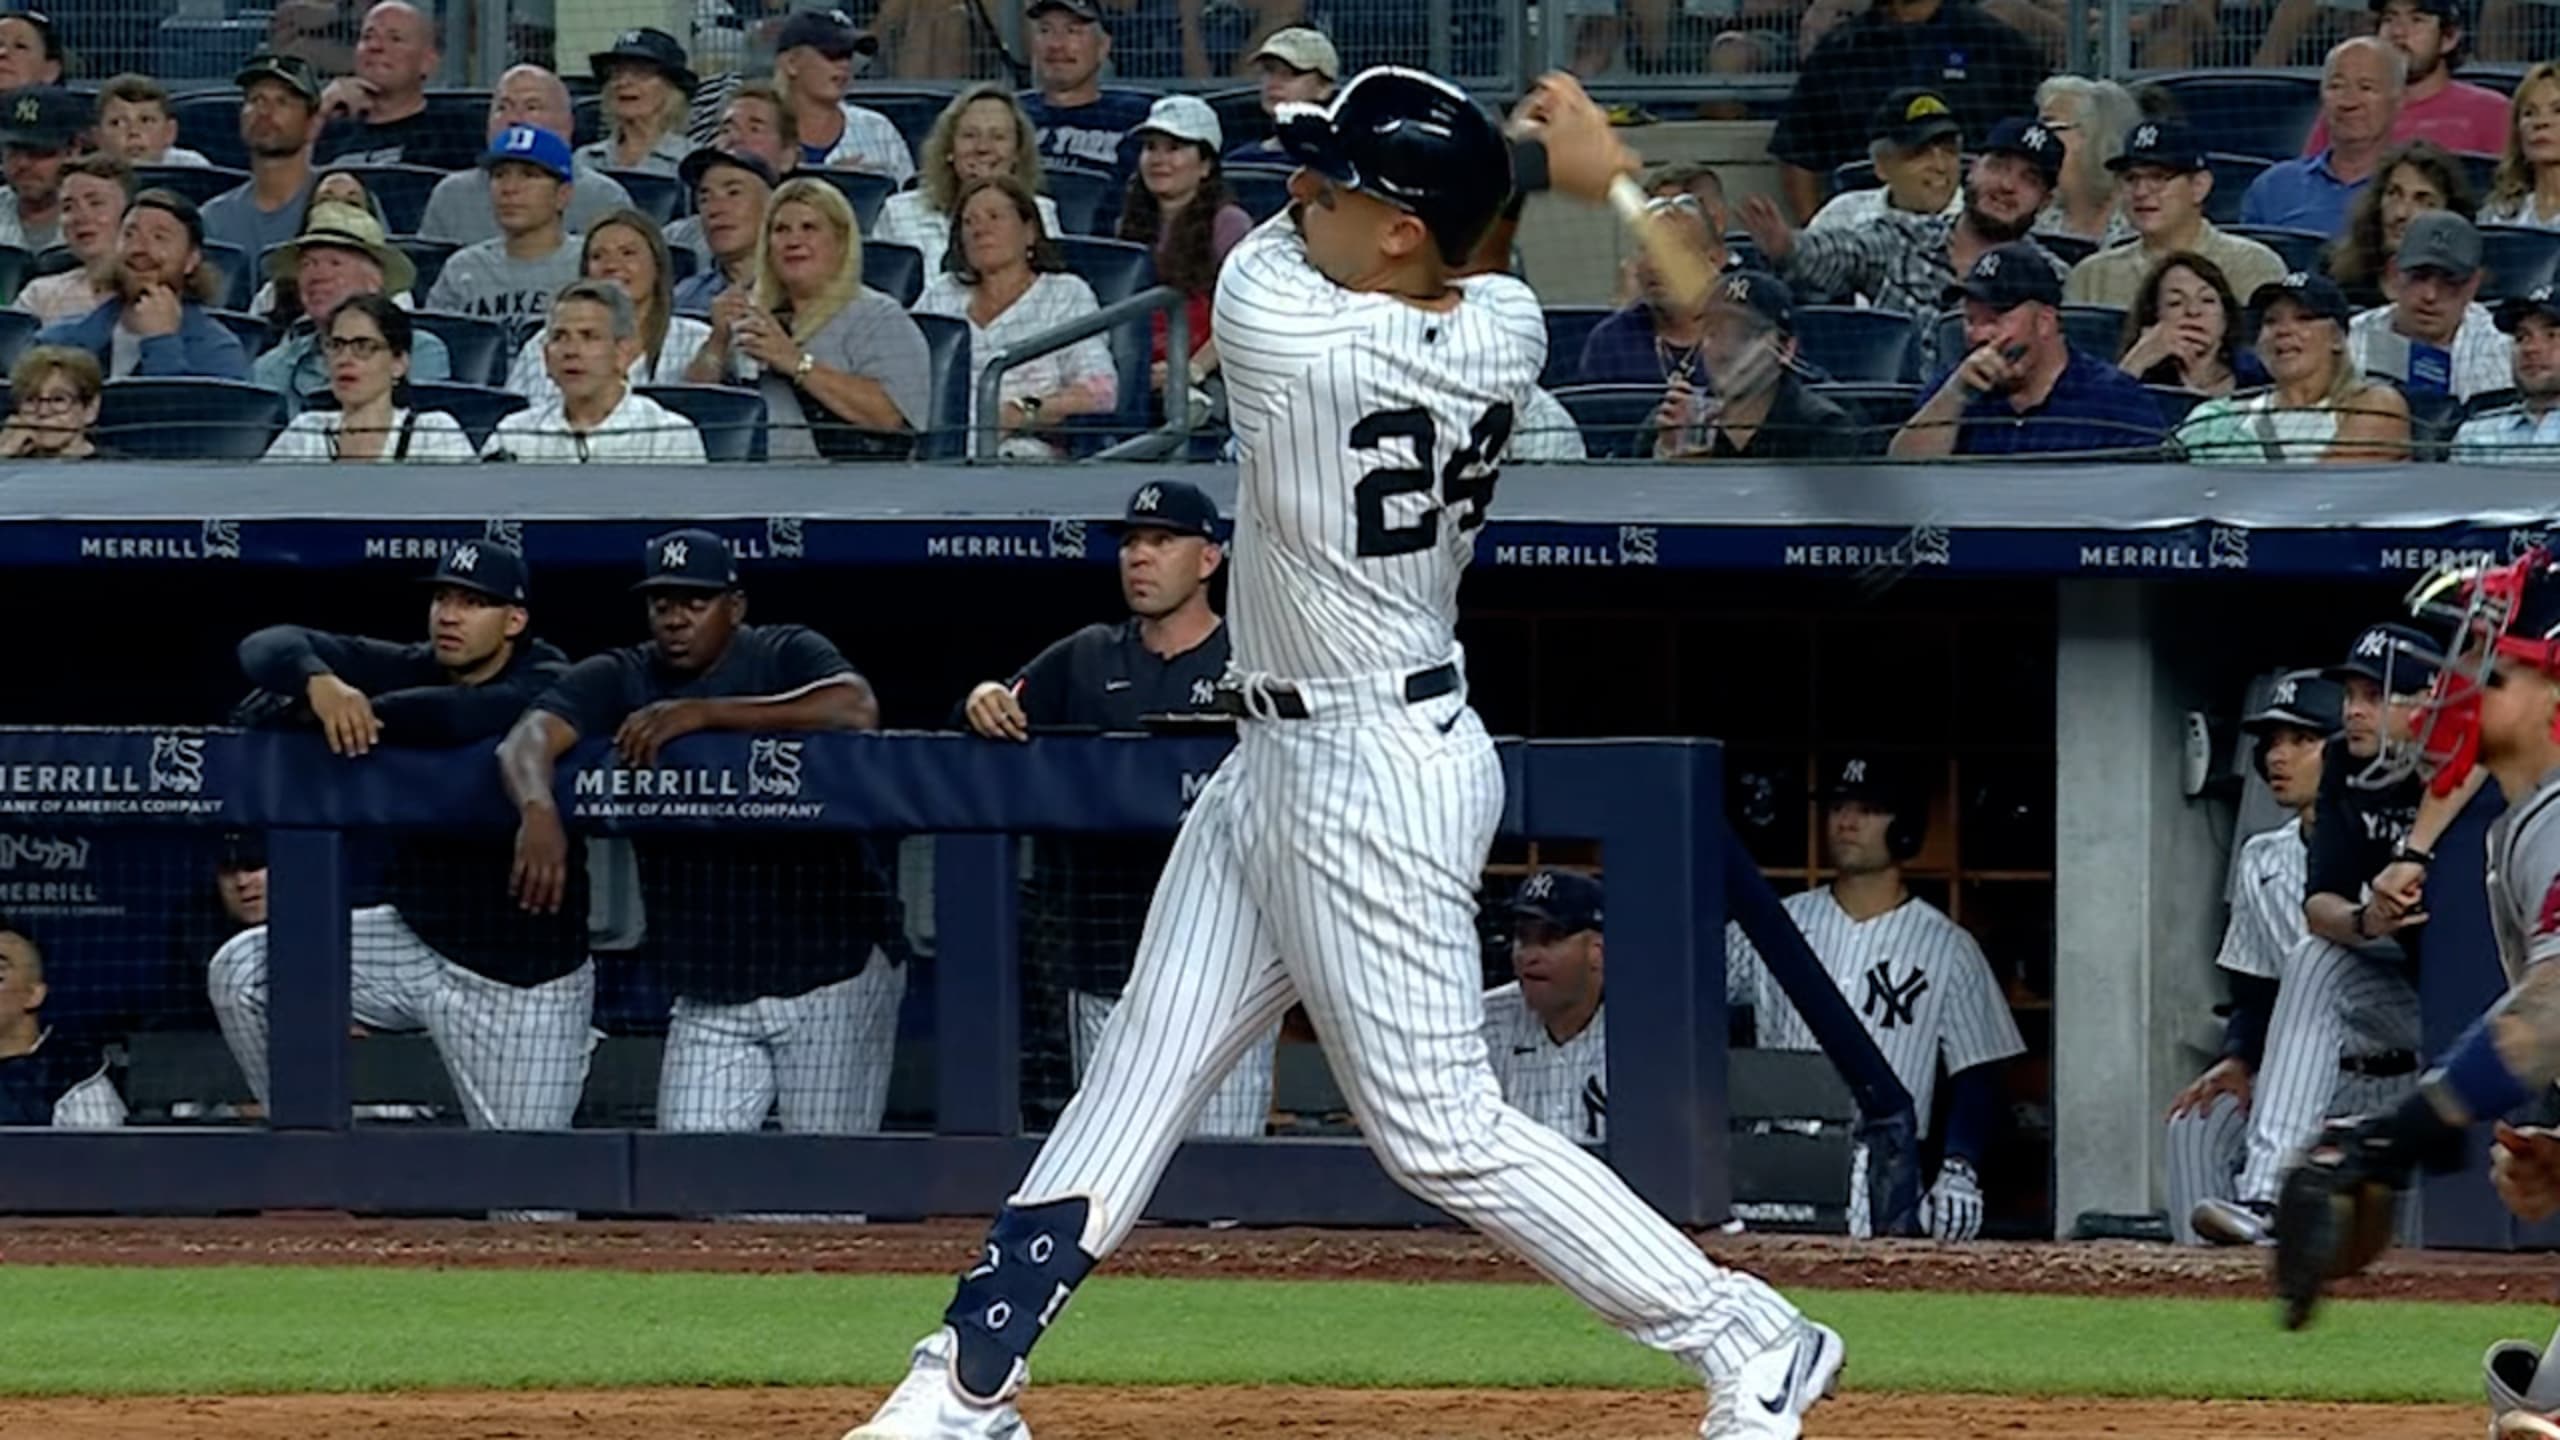 Aaron Judge homers in Yankees' 7-1 win over White Sox - Pinstripe Alley